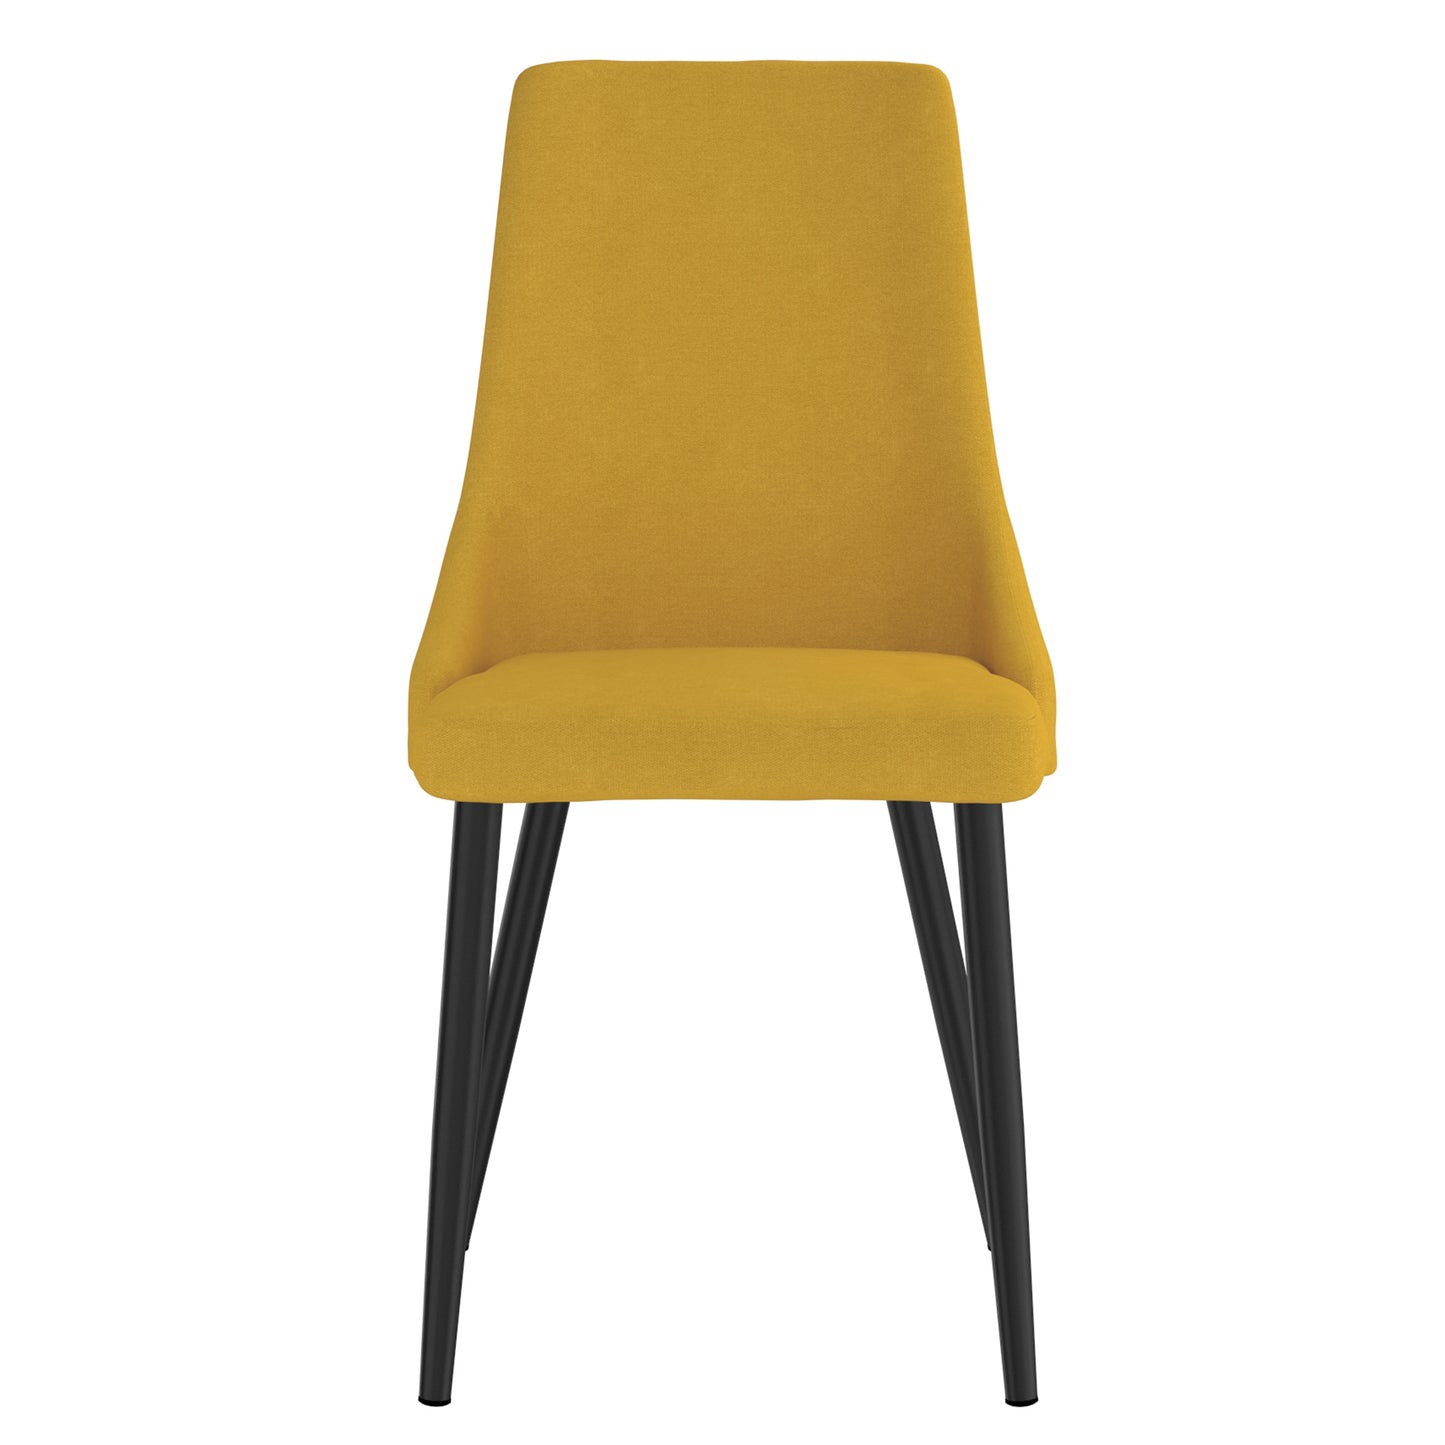 (VENICE MUSTARD- 2 PACK)- FABRIC DINING CHAIRS